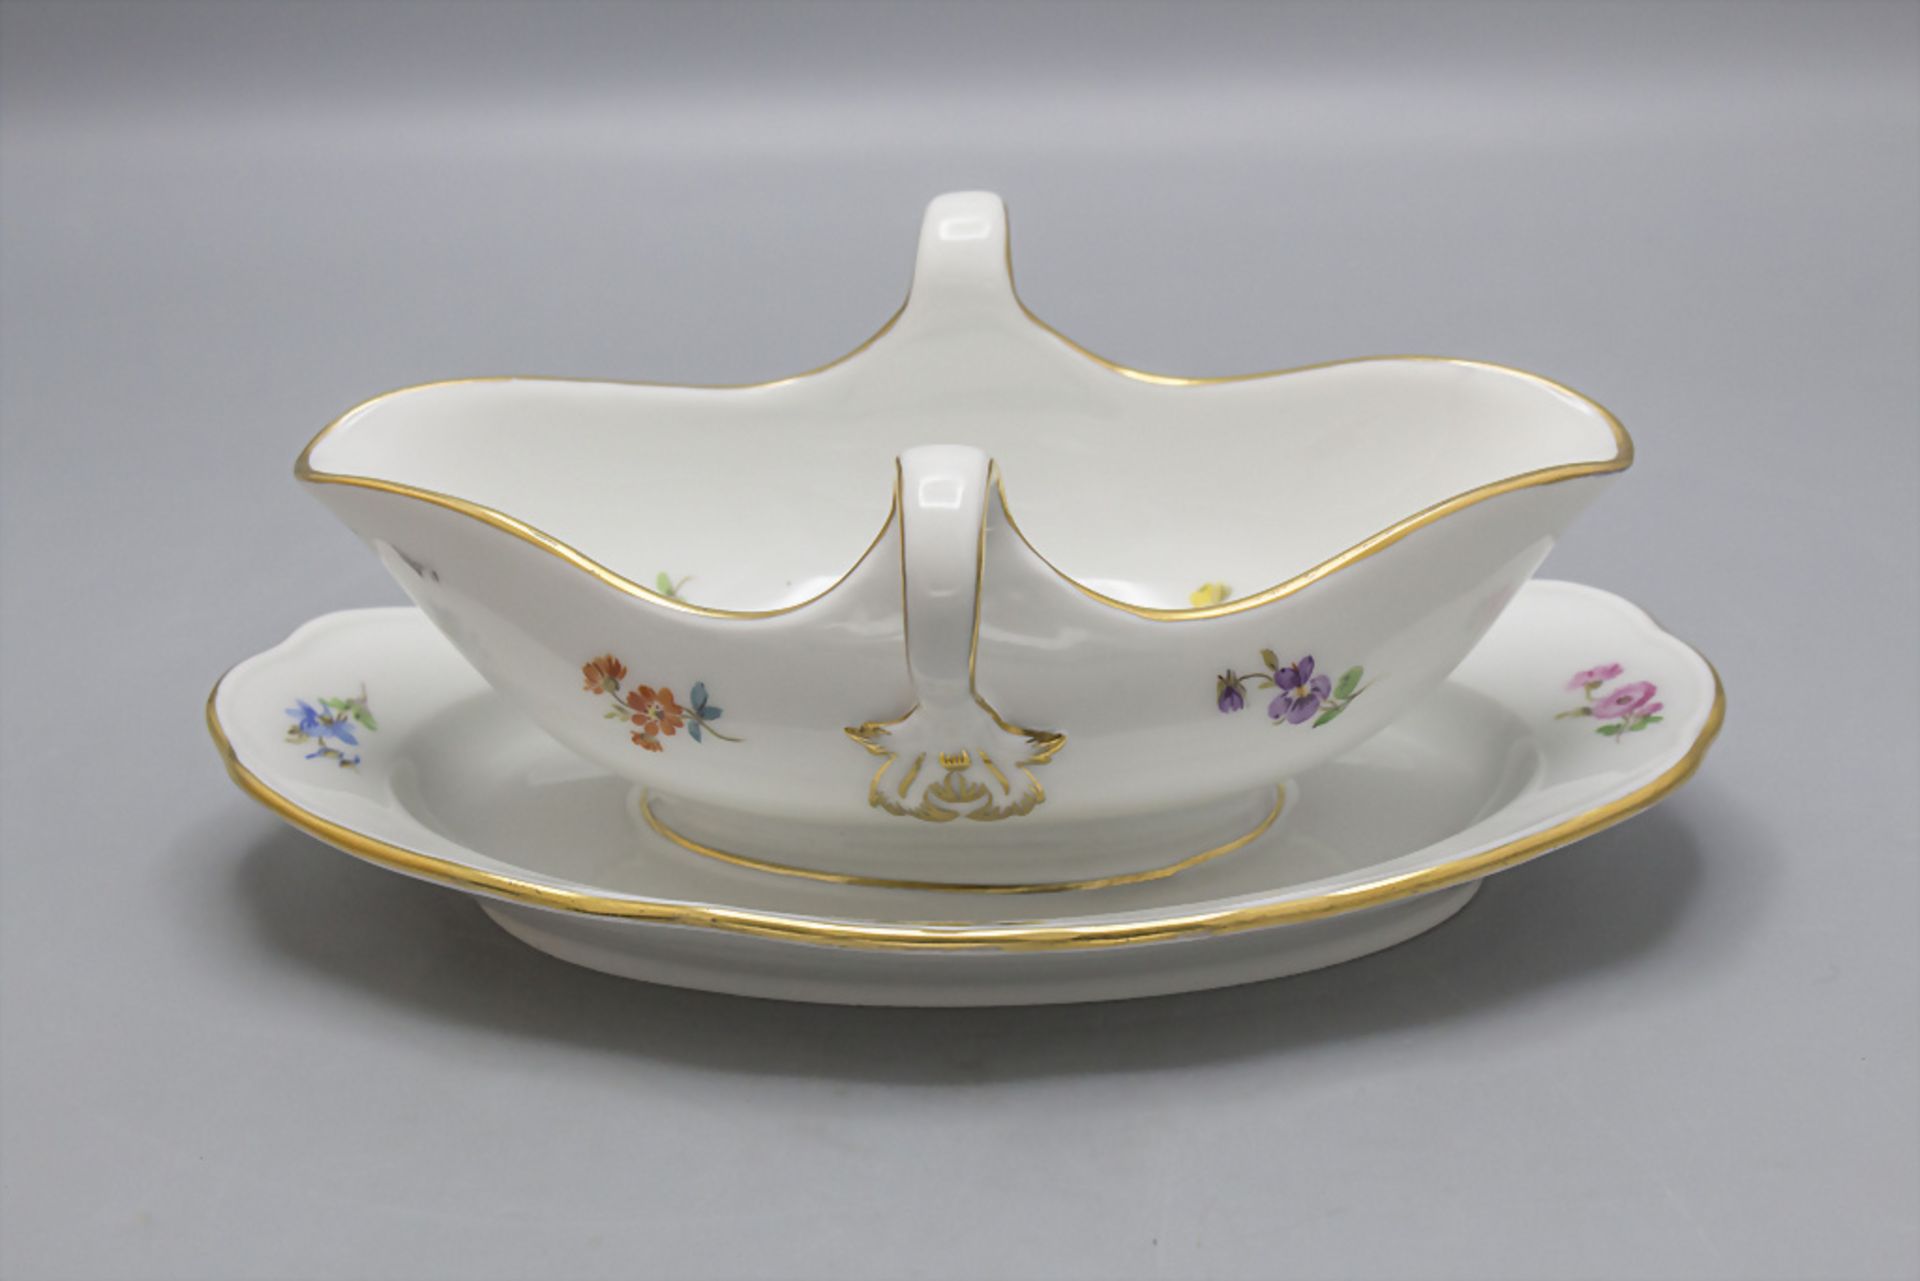 Sauciere mit Streublumen / A sauce boat with scattered flowers, Meissen, wohl 20. Jh. - Image 3 of 5